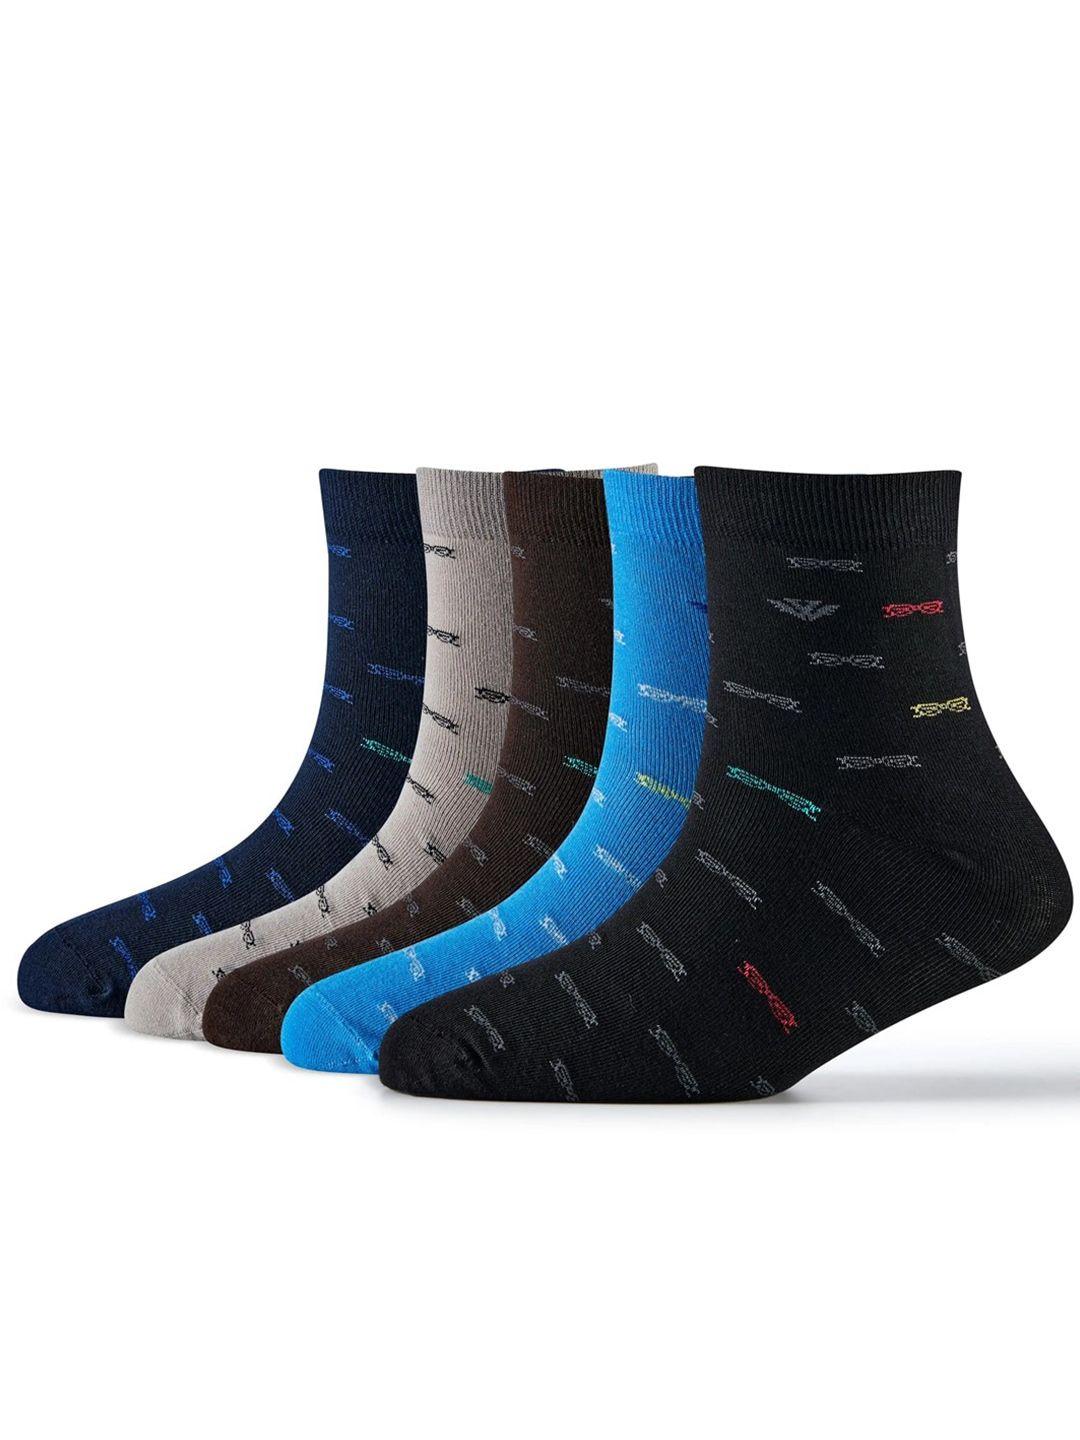 cotstyle pack of 5 patterned ankle-length socks